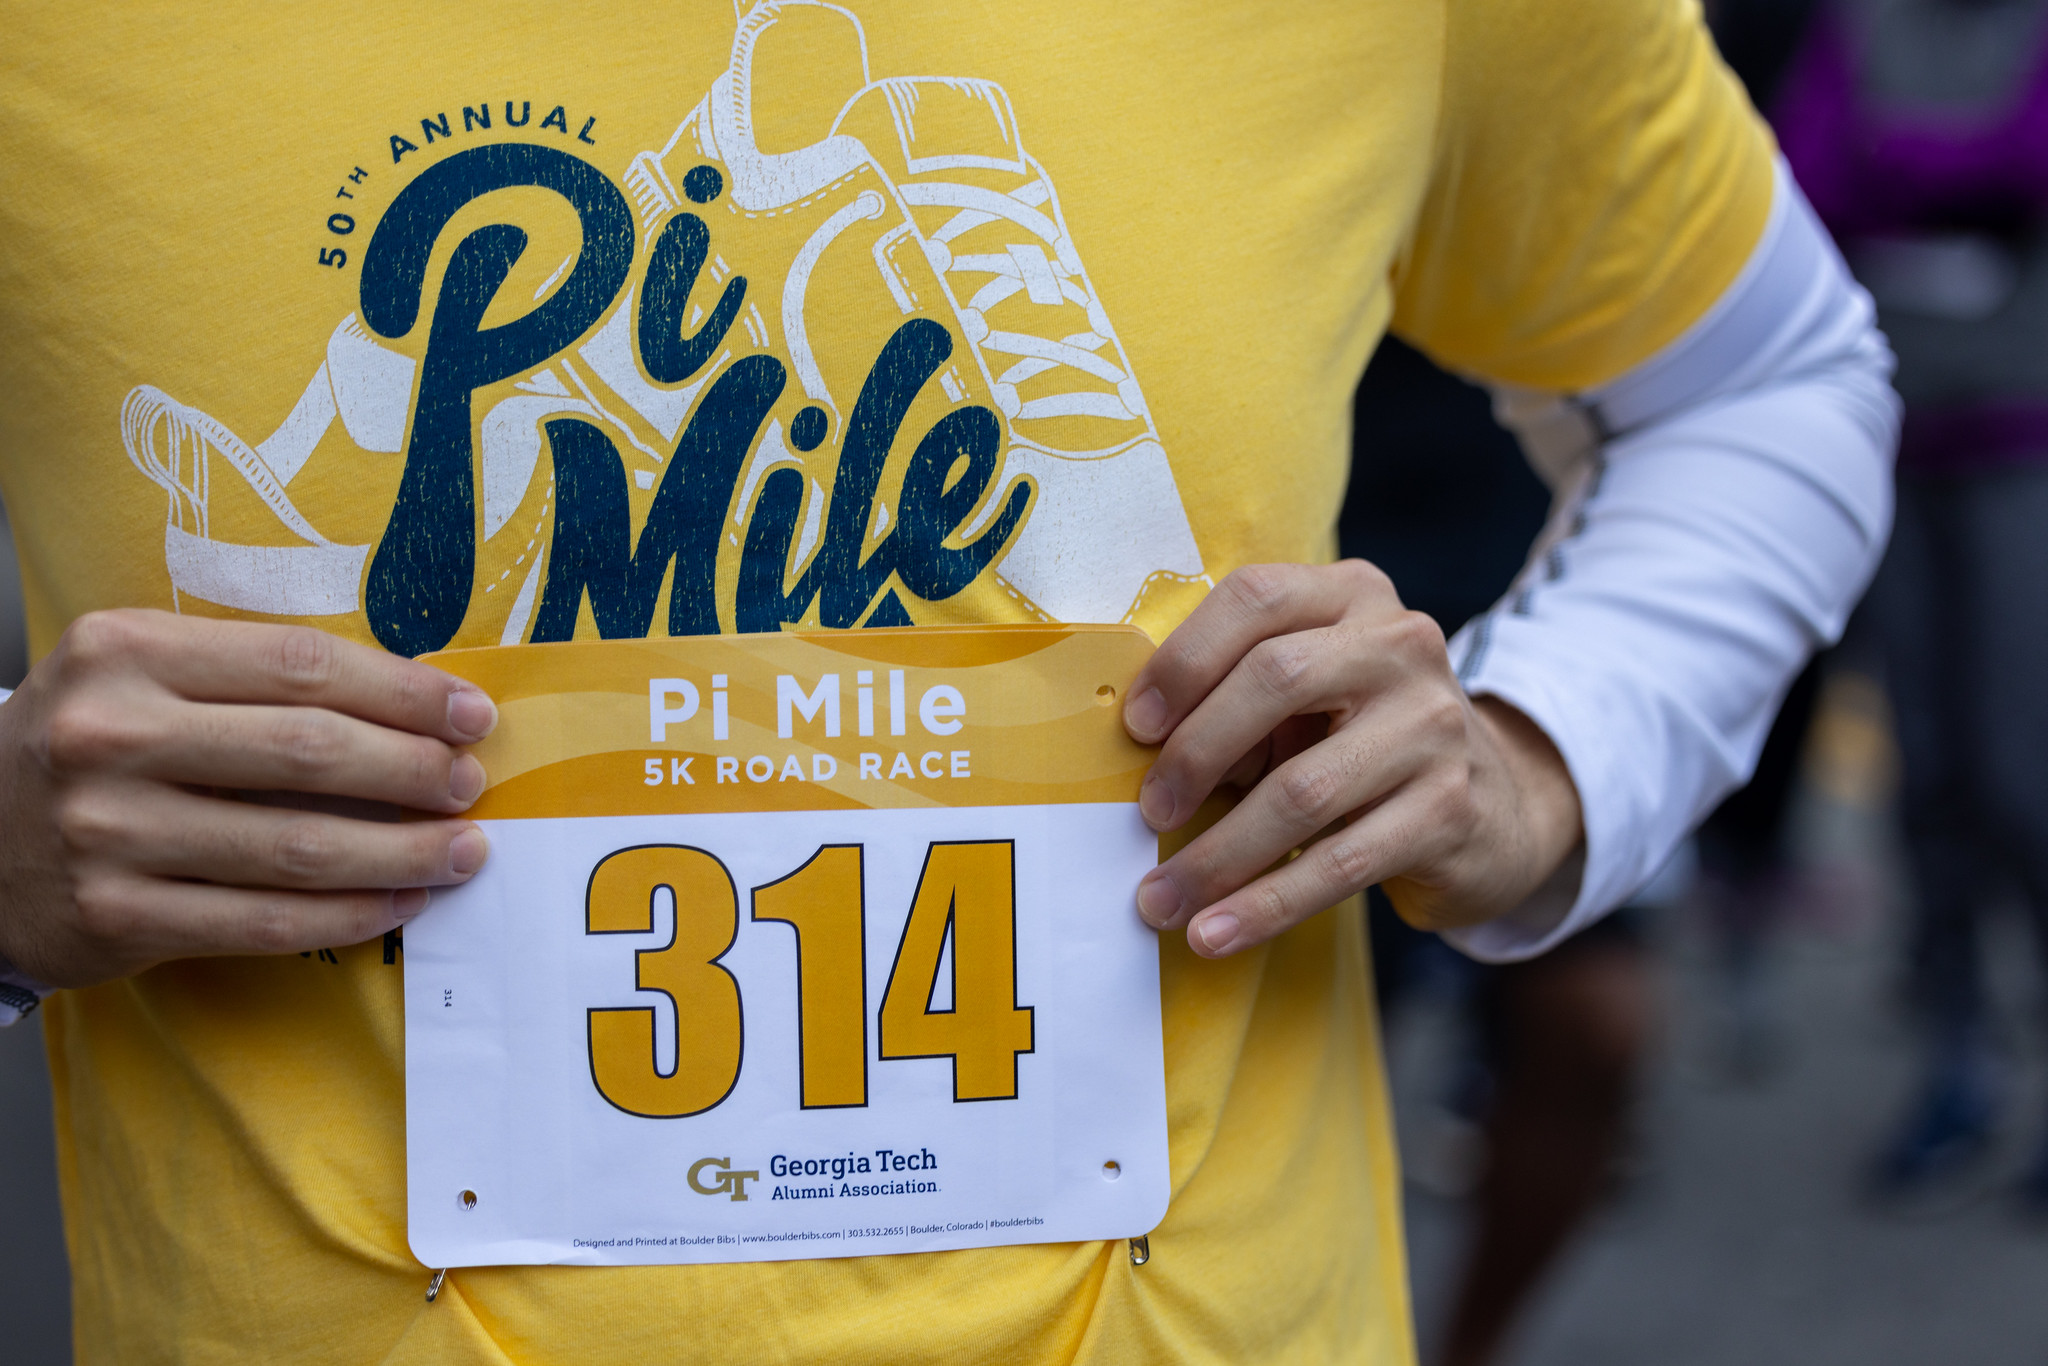 Closeup of Pi Mile tshirt and race number